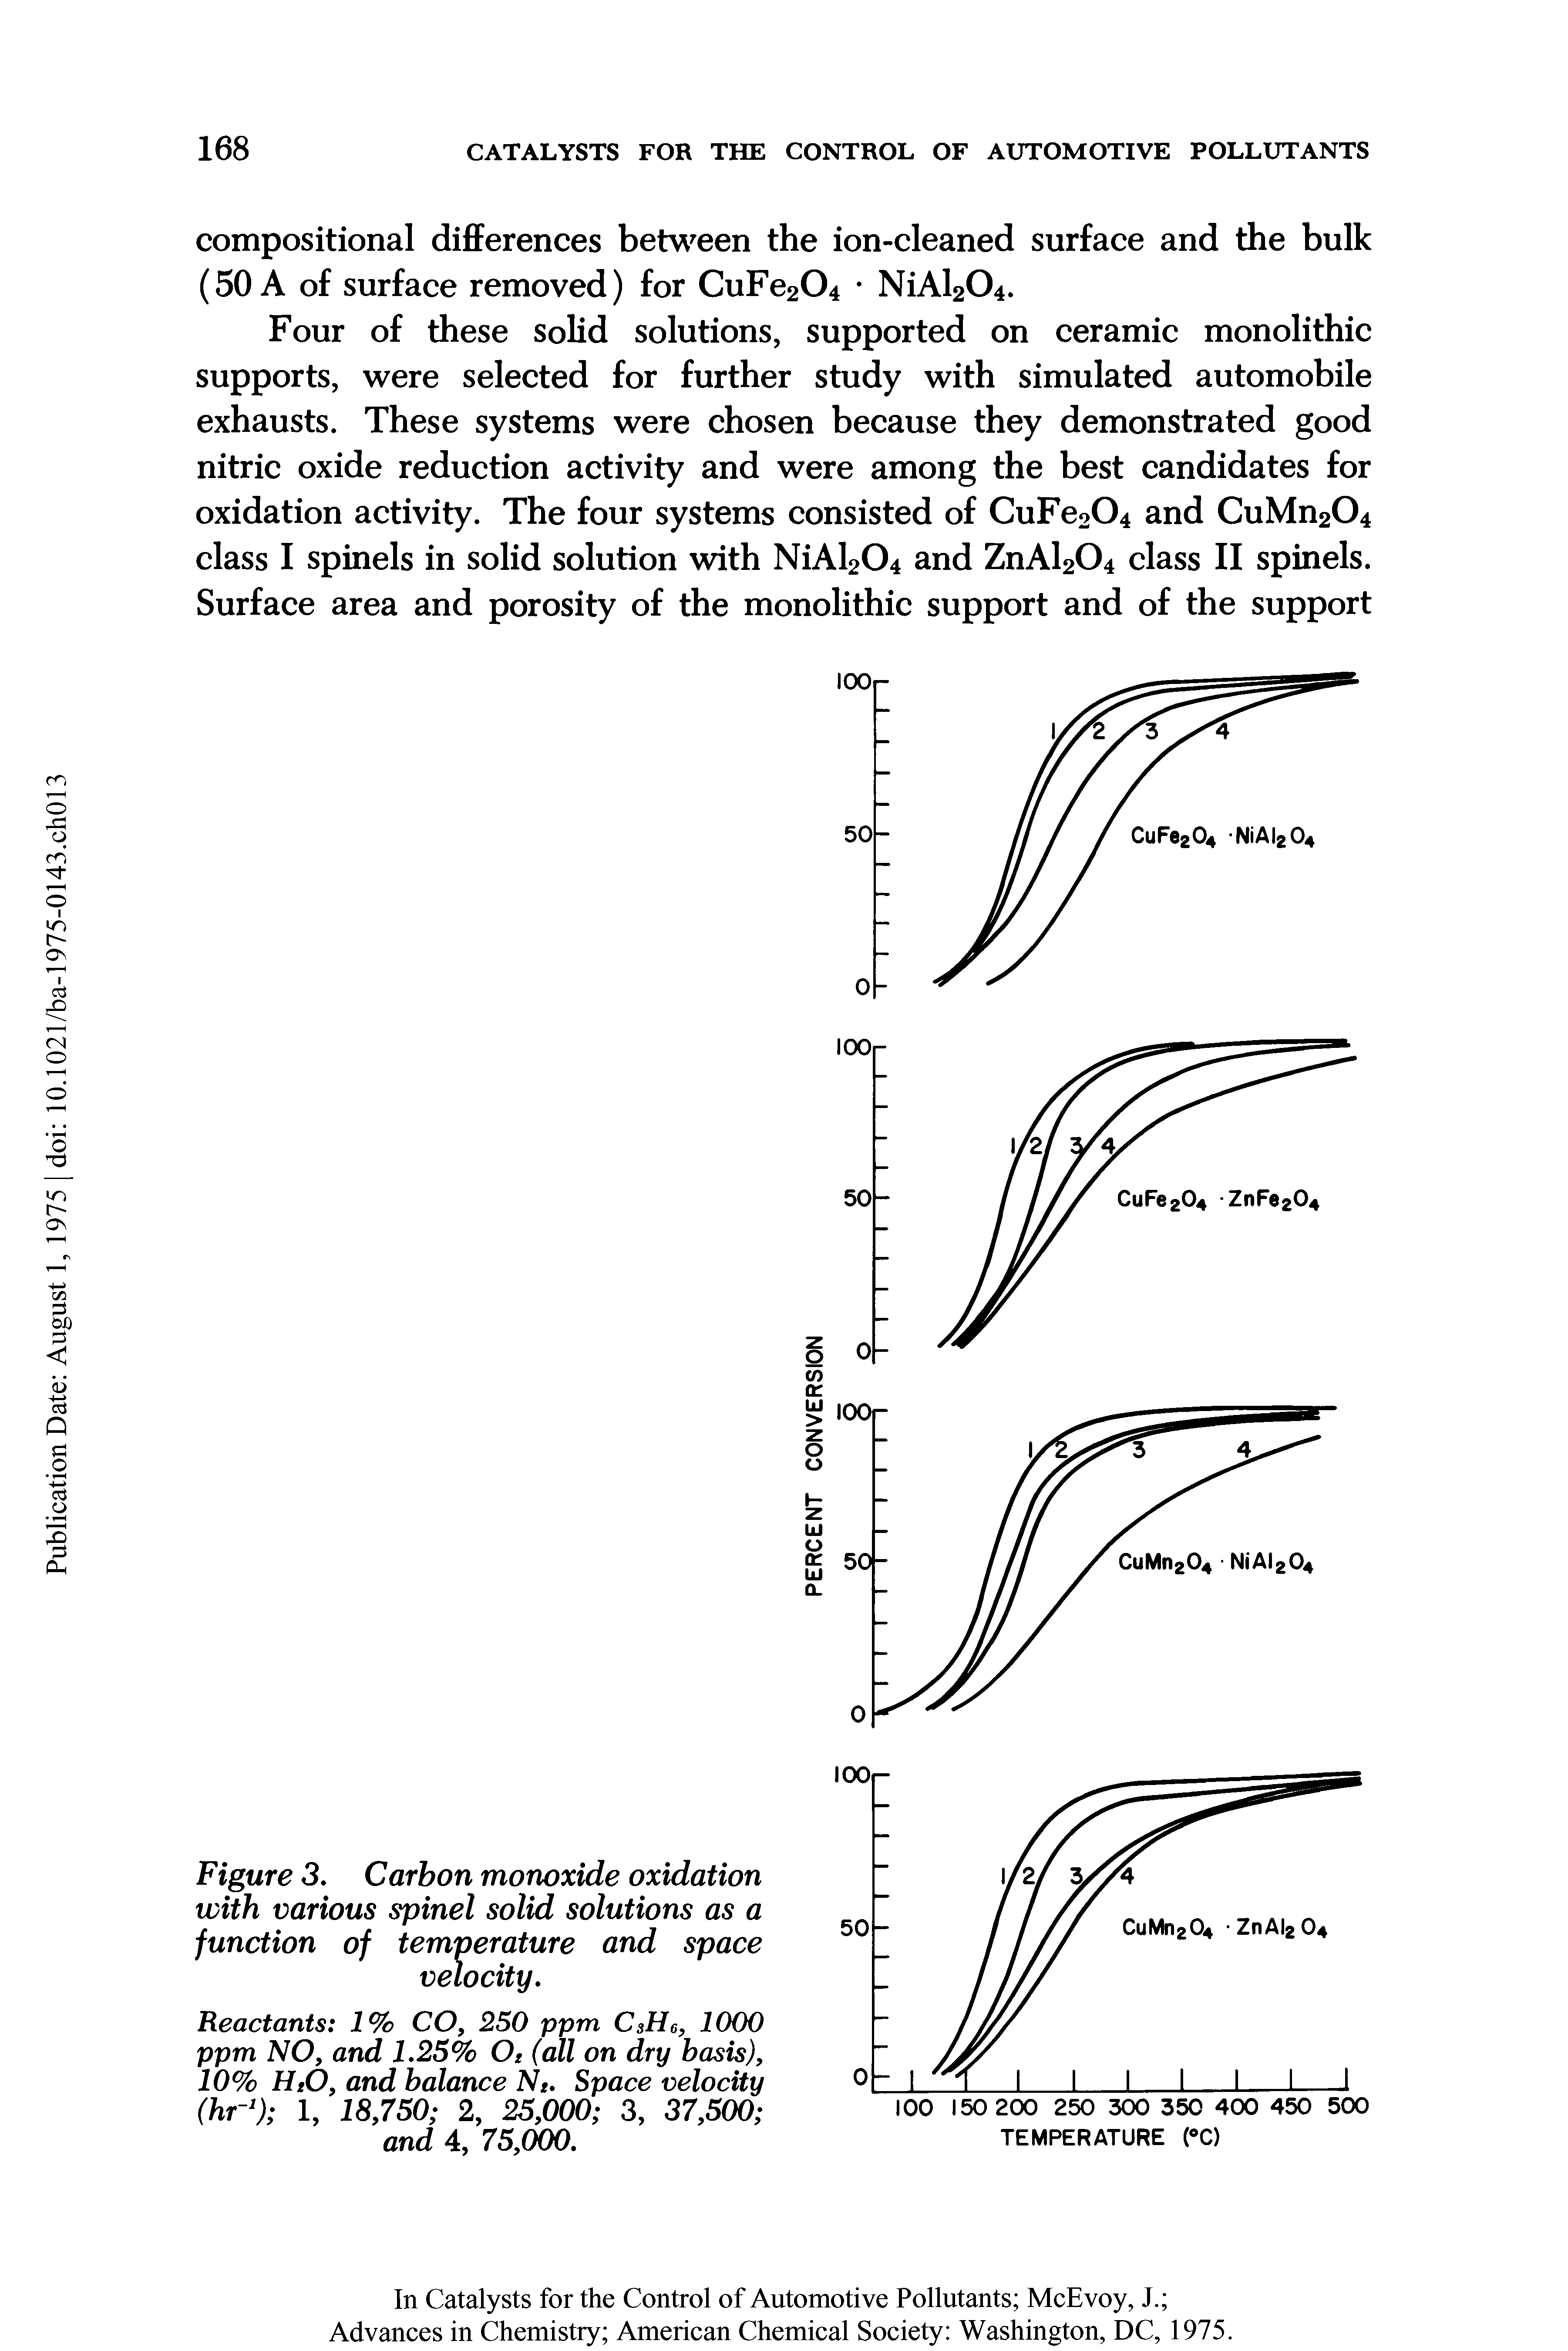 Figure 3. Carbon monoxide oxidation with various spinel solid solutions as a function of temperature and space velocity.